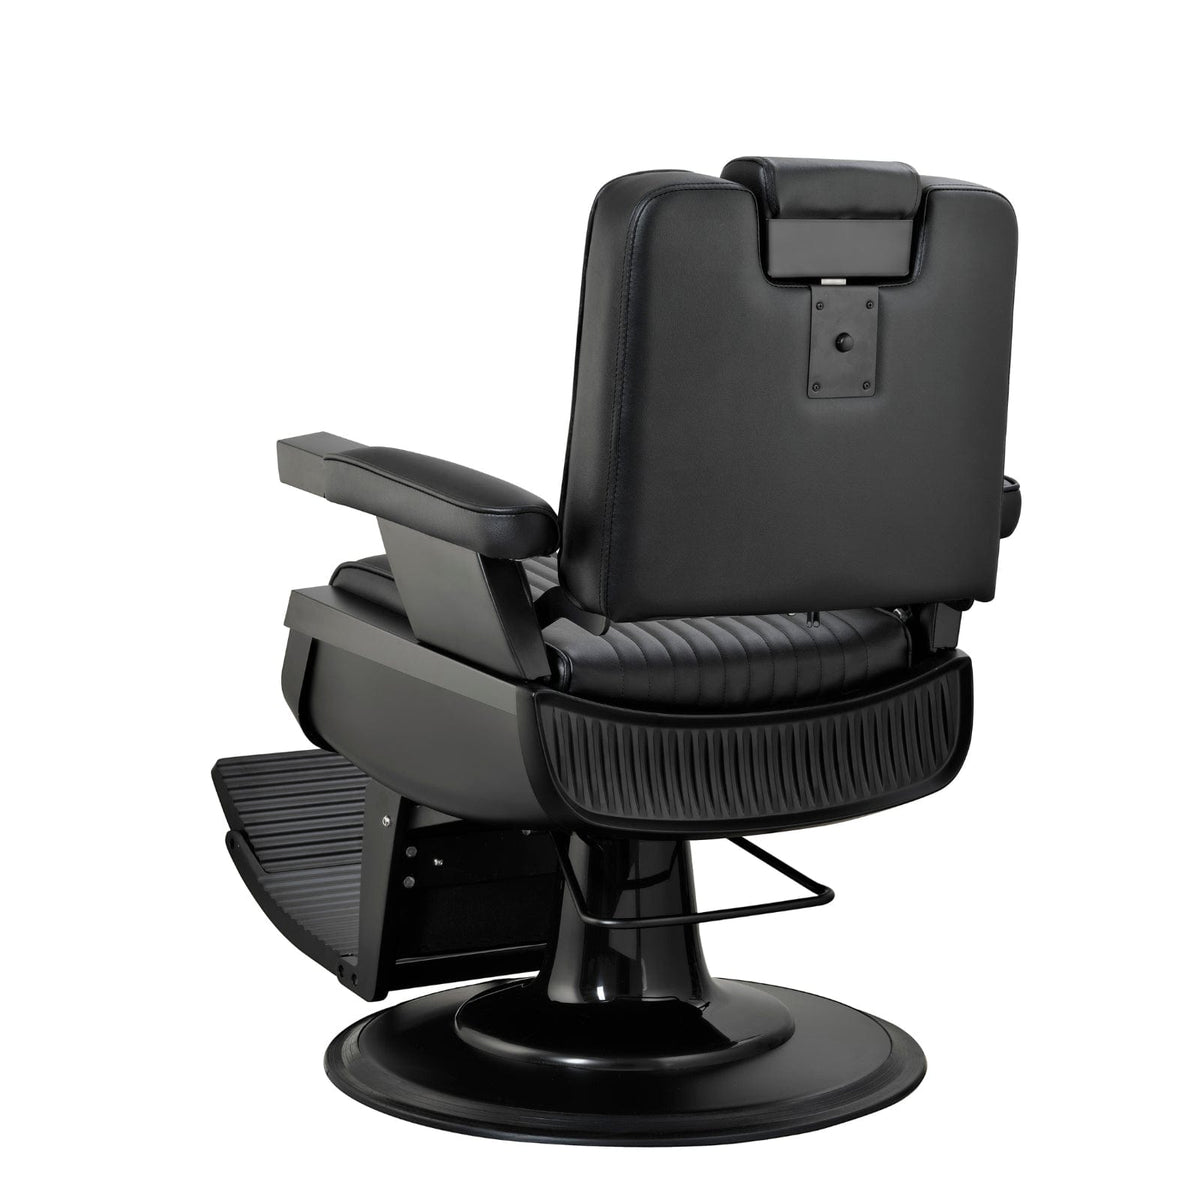 Sherman Barber Chair with Recessed Headrest